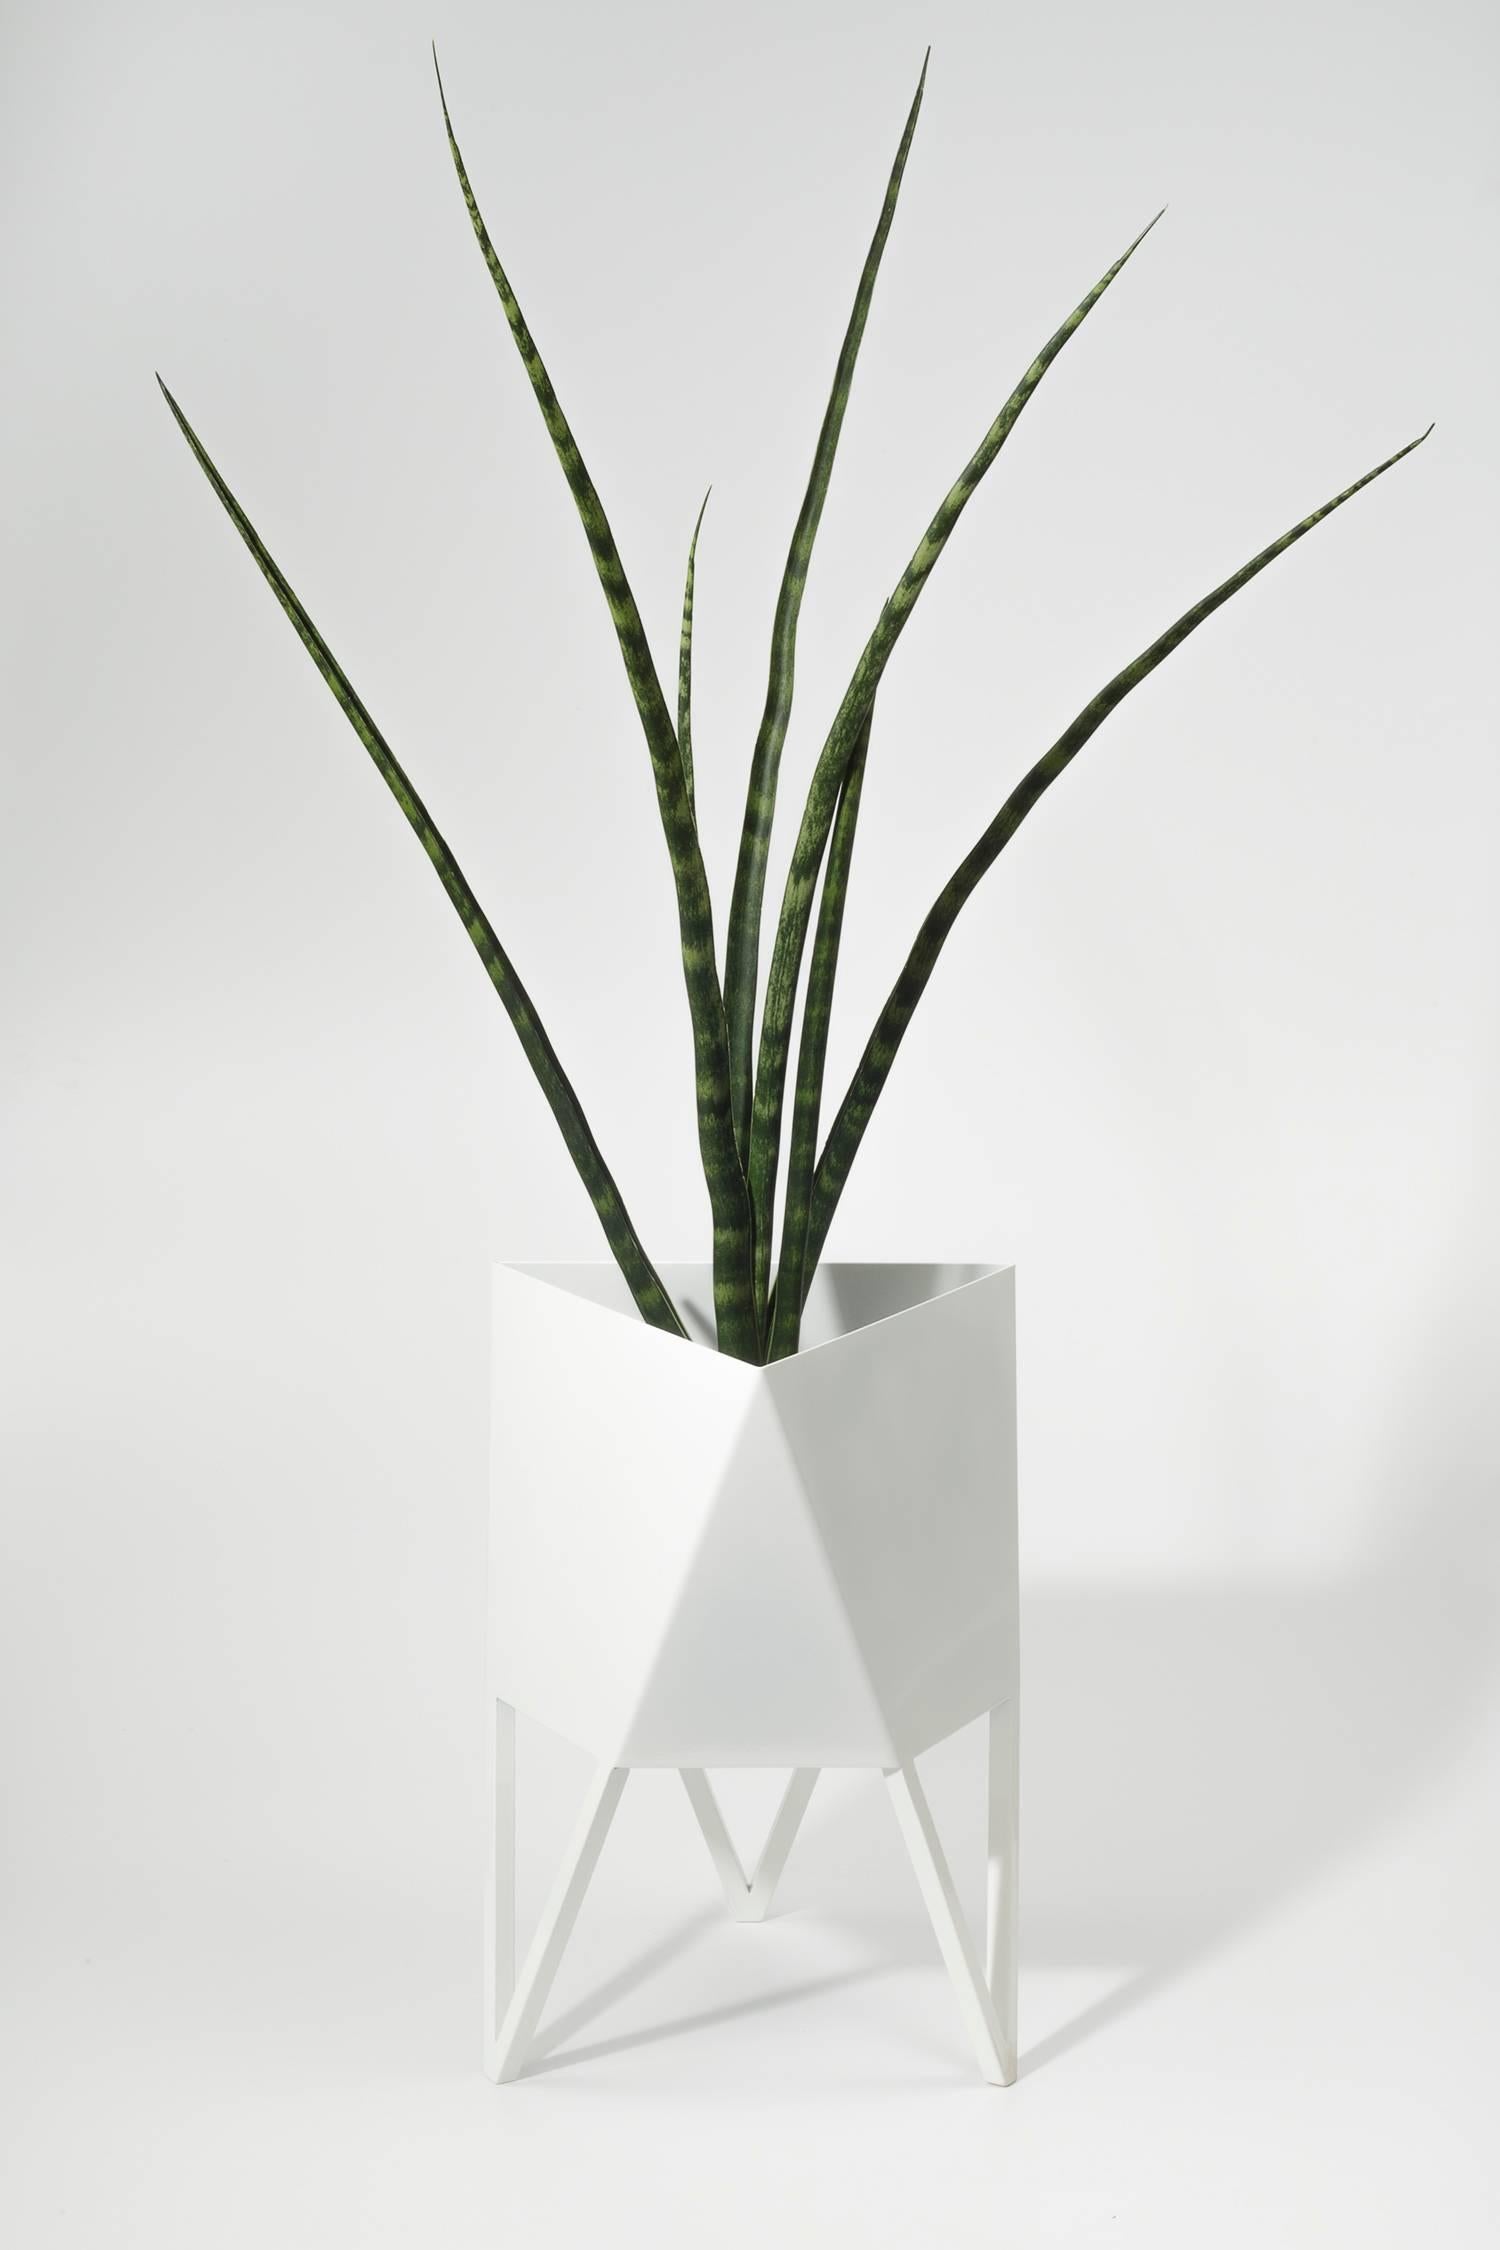 Small Deca Planter, Light Pink, Steel, Modern, Geometric by Force/Collide 1